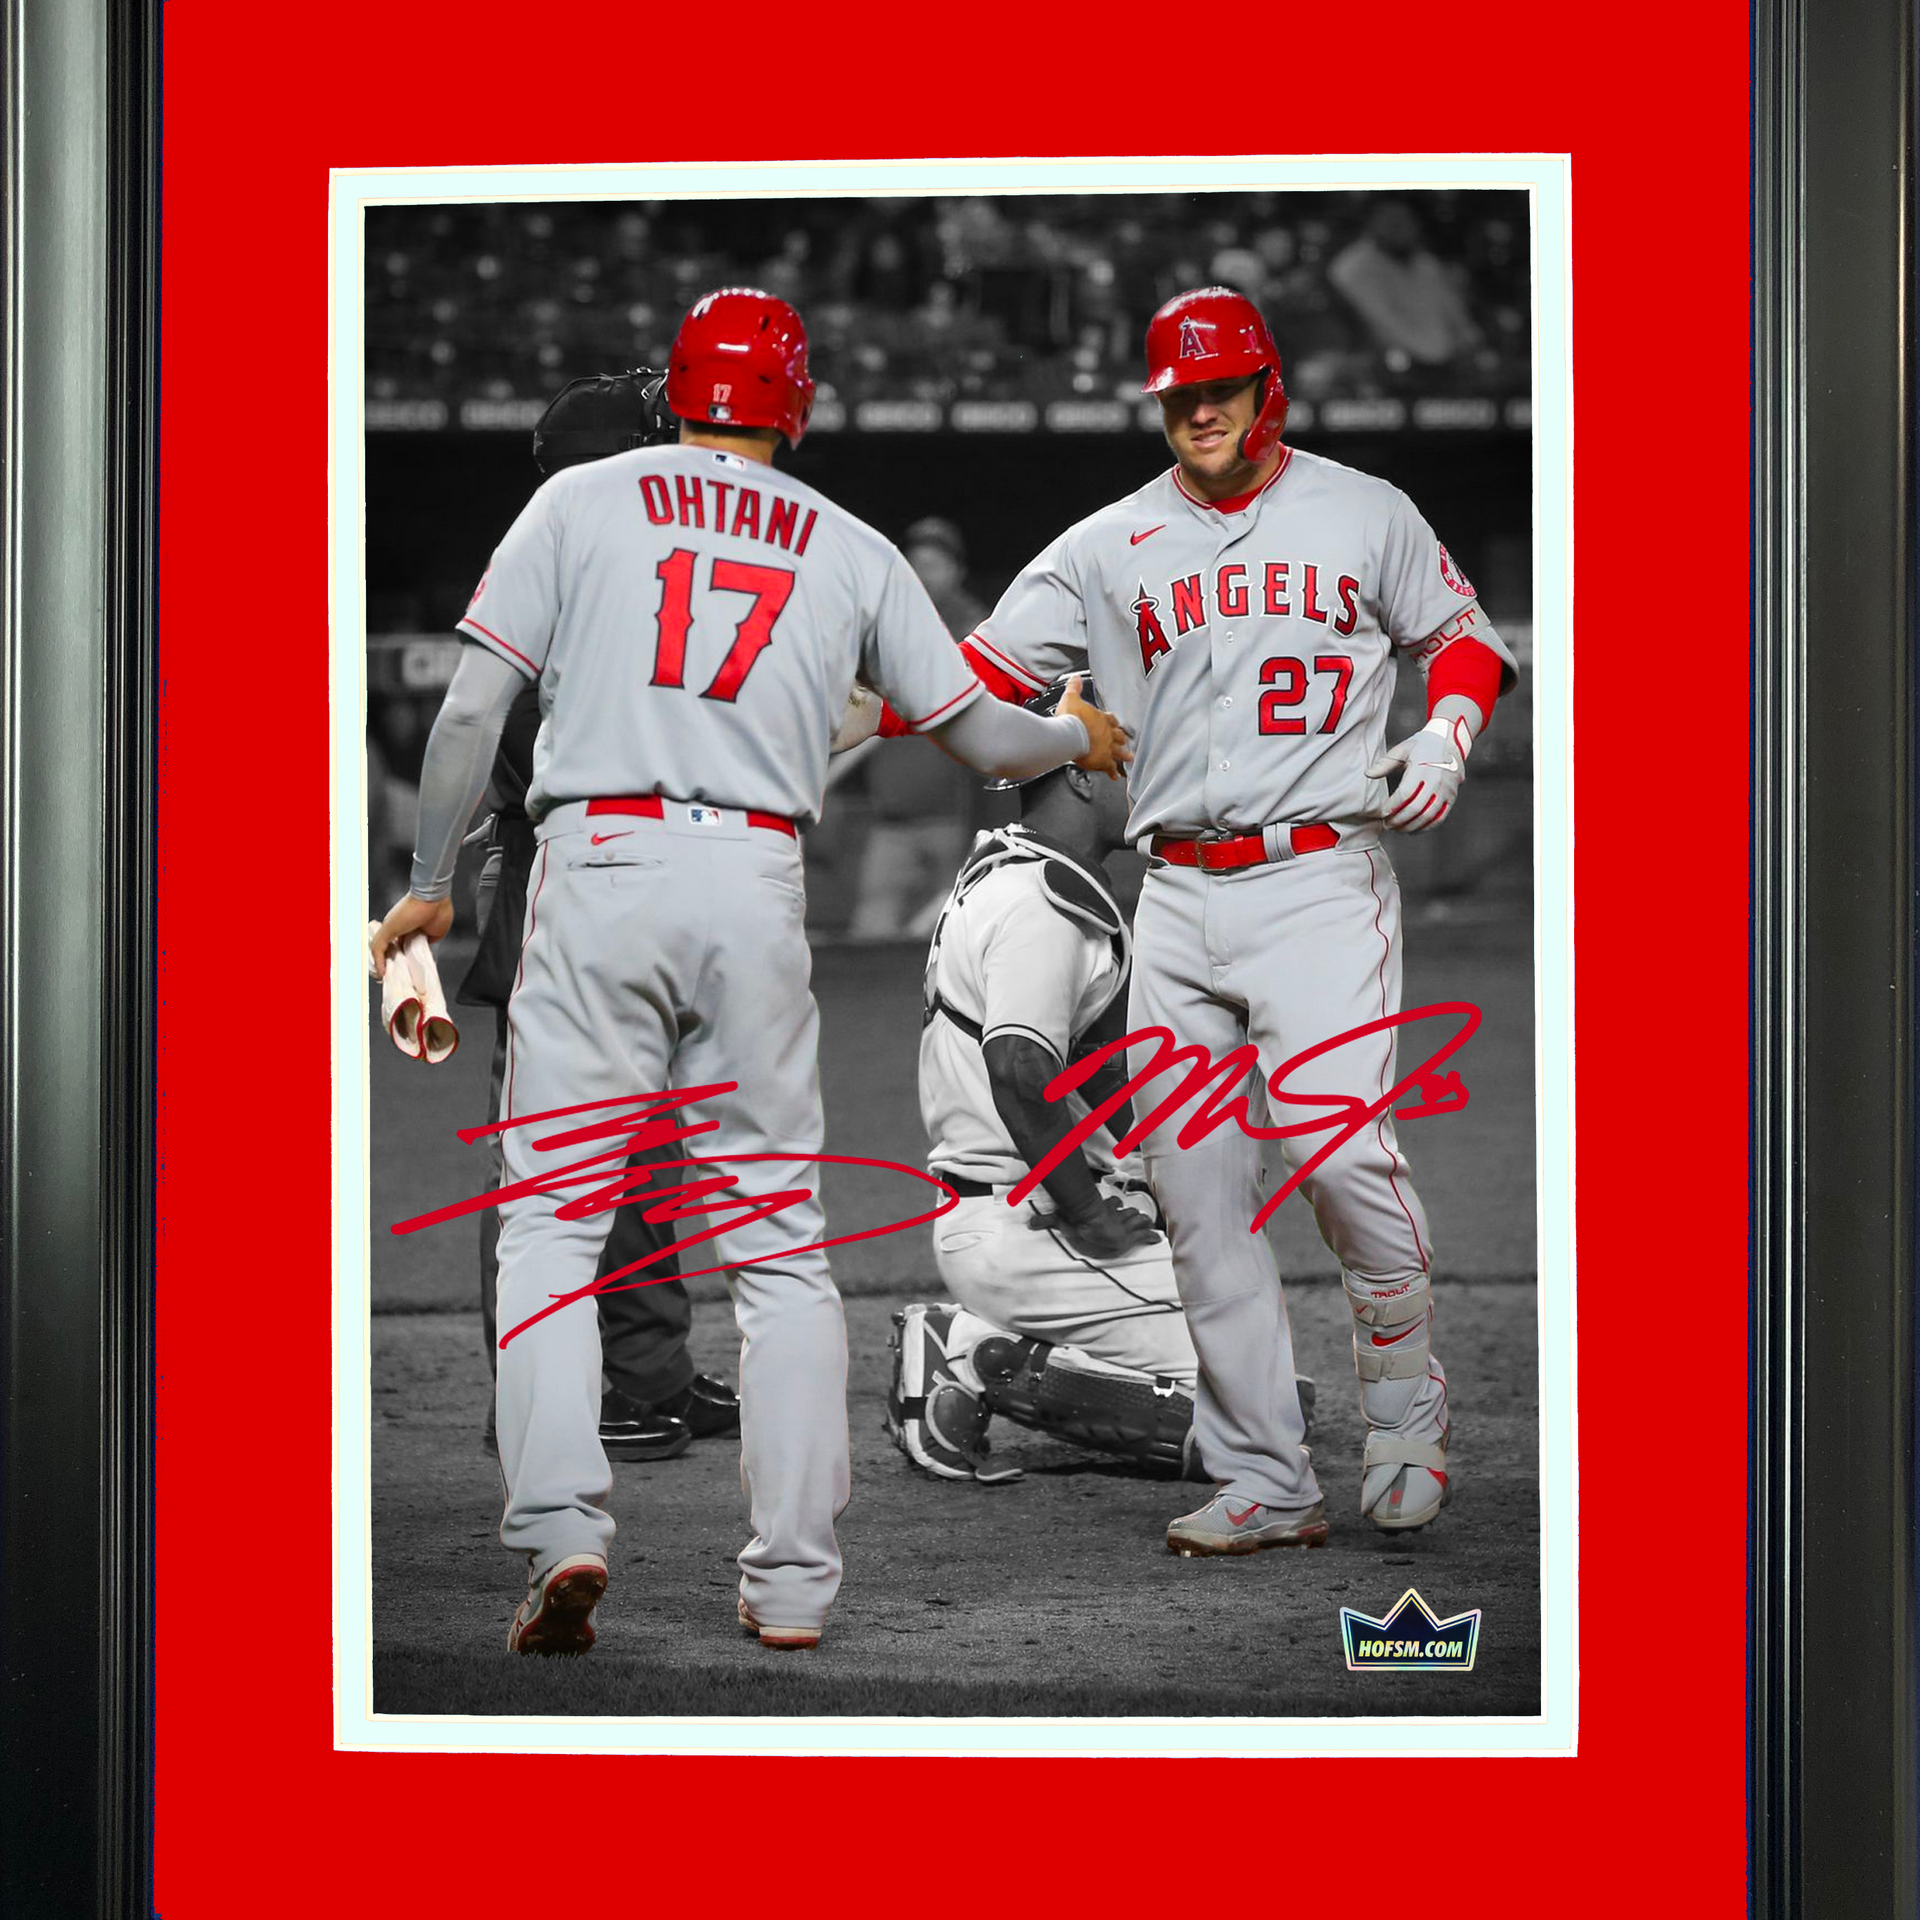 Framed Facsimile Autographed Mike Trout 33x42 Los Angeles LA Anaheim Red  Reprint Laser Auto Baseball Jersey at 's Sports Collectibles Store